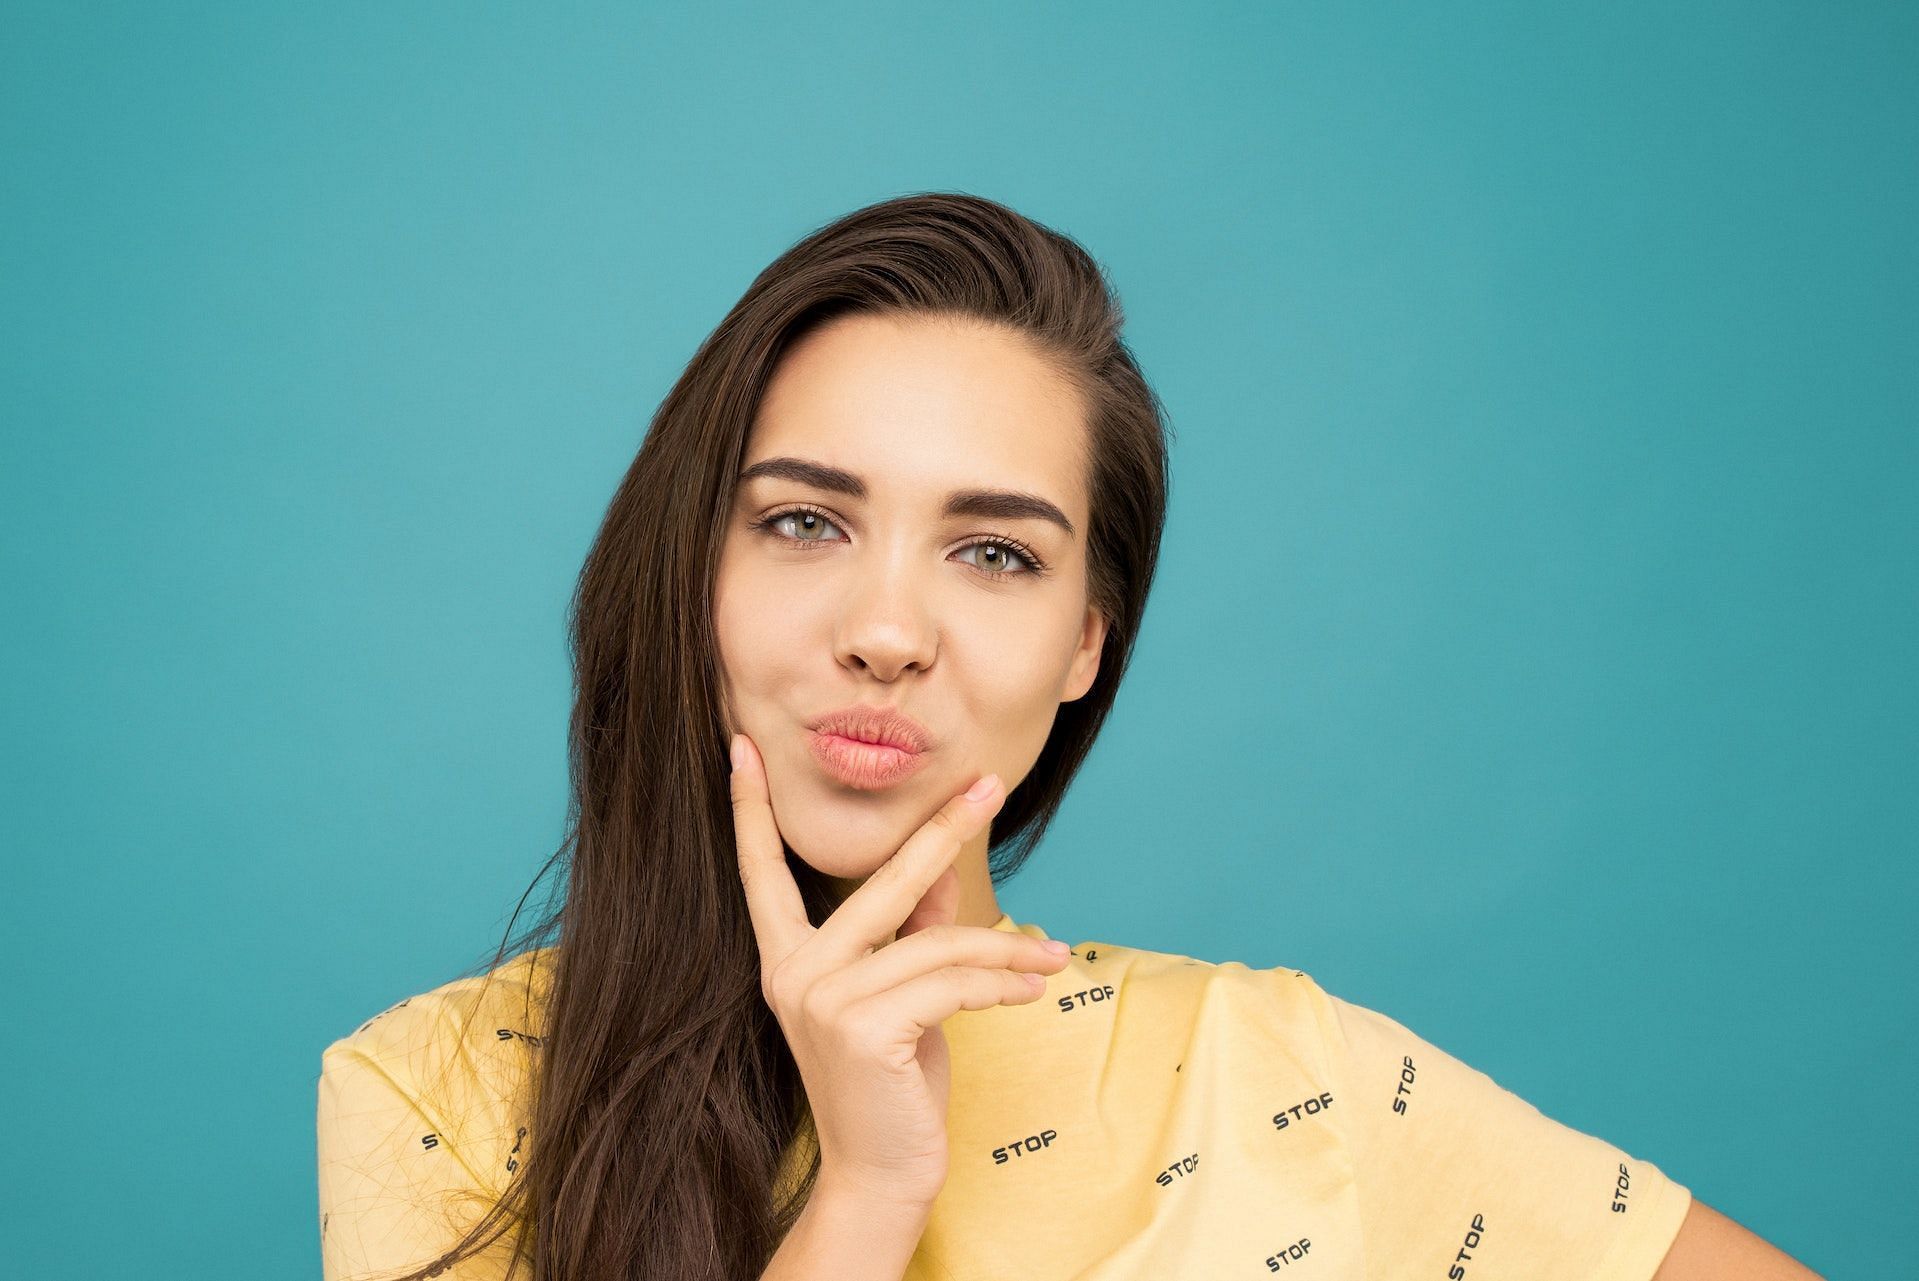 Face yoga for jowls works on the cheeks and the muscles around the lips. (Photo via Pexels/Sound On)